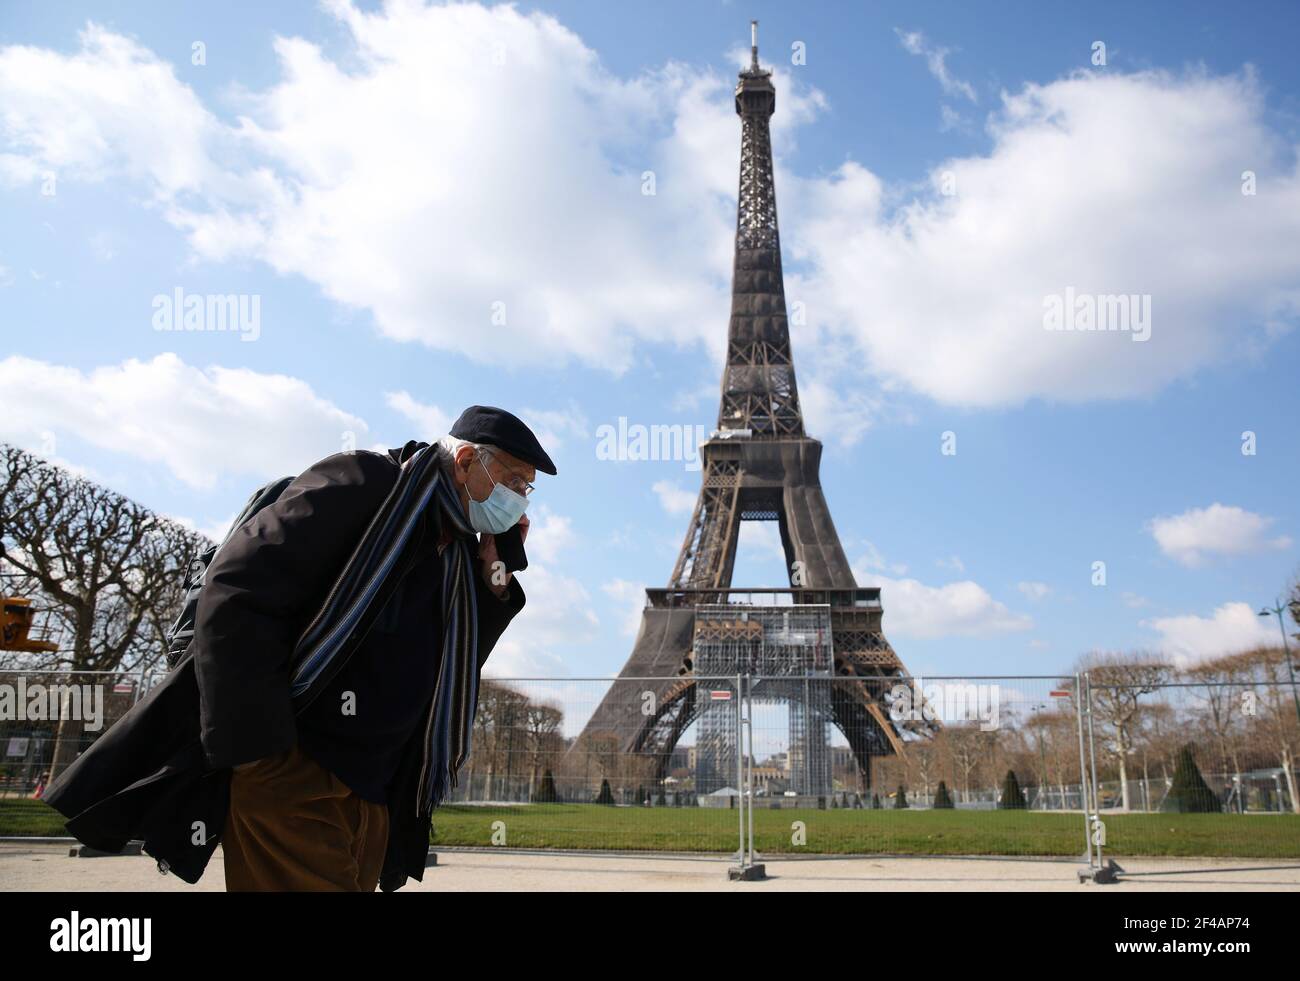 Paris, France. 19th Mar, 2021. A man wearing a face mask walks in the Champ de Mars in Paris, France, on March 19, 2021. French Prime Minister Jean Castex on Thursday announced 'new massive measures' to curb COVID-19 in the country's 16 worst-hit regions, including Paris. Starting Friday midnight, about 18 million French people in regions such as Paris, Hauts-de-France in the north as well as the Alpes-Maritimes on the Mediterranean should stay at home, Castex announced at a press briefing on the epidemic situation. Credit: Gao Jing/Xinhua/Alamy Live News Stock Photo